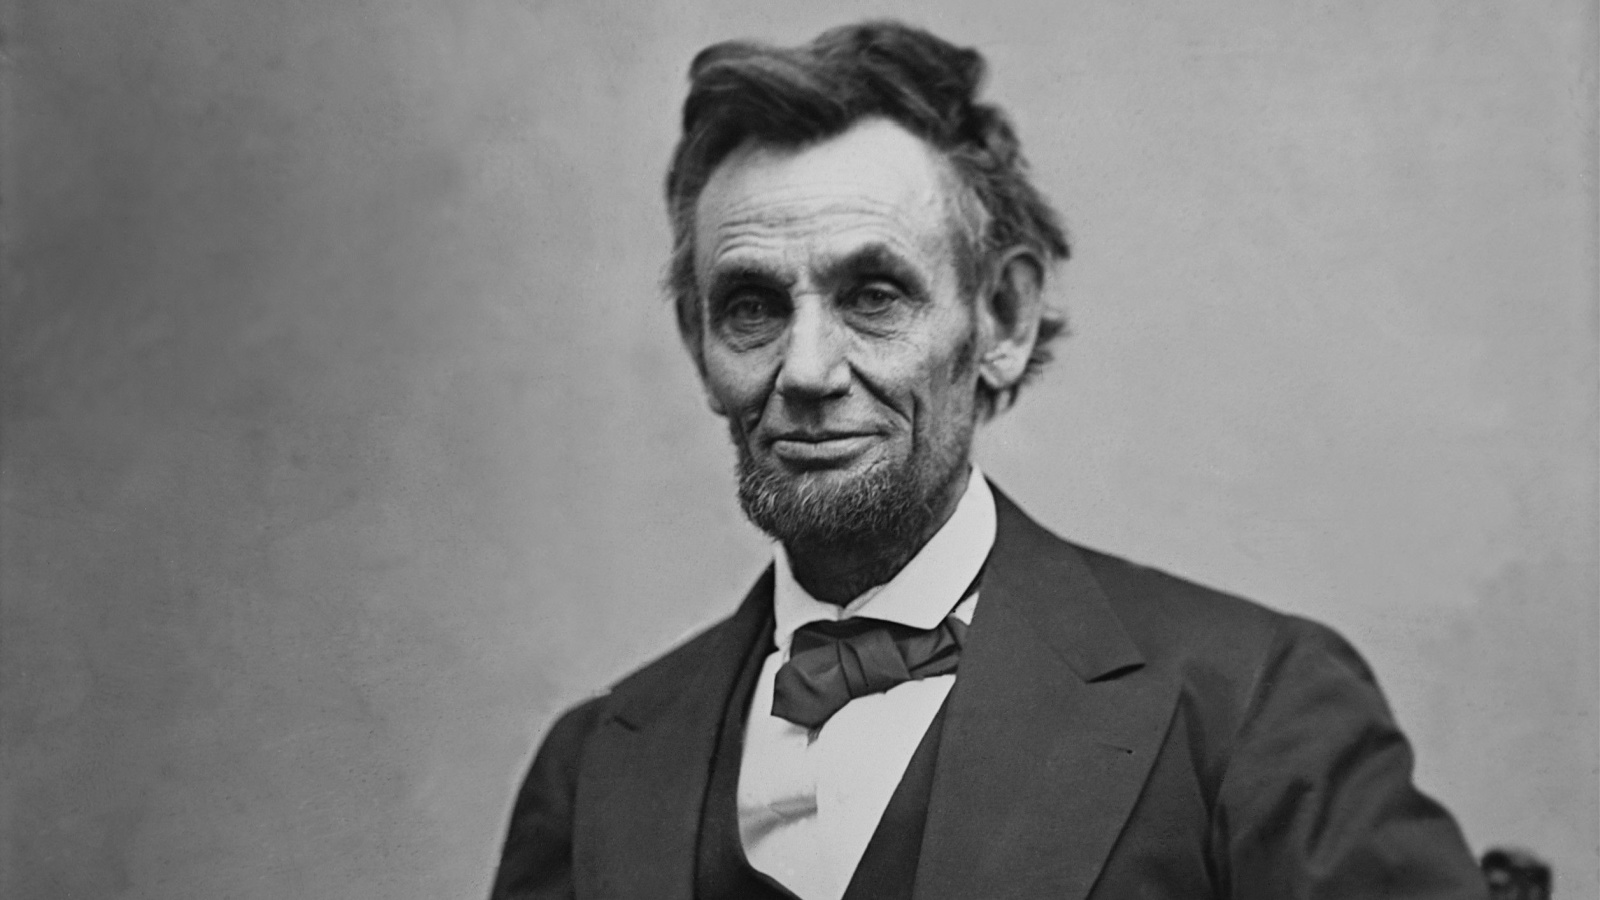 image credit: Everett-Collection/Shutterstock <p><span>In 1863, during the American Civil War, Abraham Lincoln delivered the Gettysburg Address. In just a few minutes, he redefined the purpose of the war and the concept of democracy. Lincoln’s profound and concise words are a masterpiece of political oratory. The Gettysburg Address continues to inspire and enlighten.</span></p>